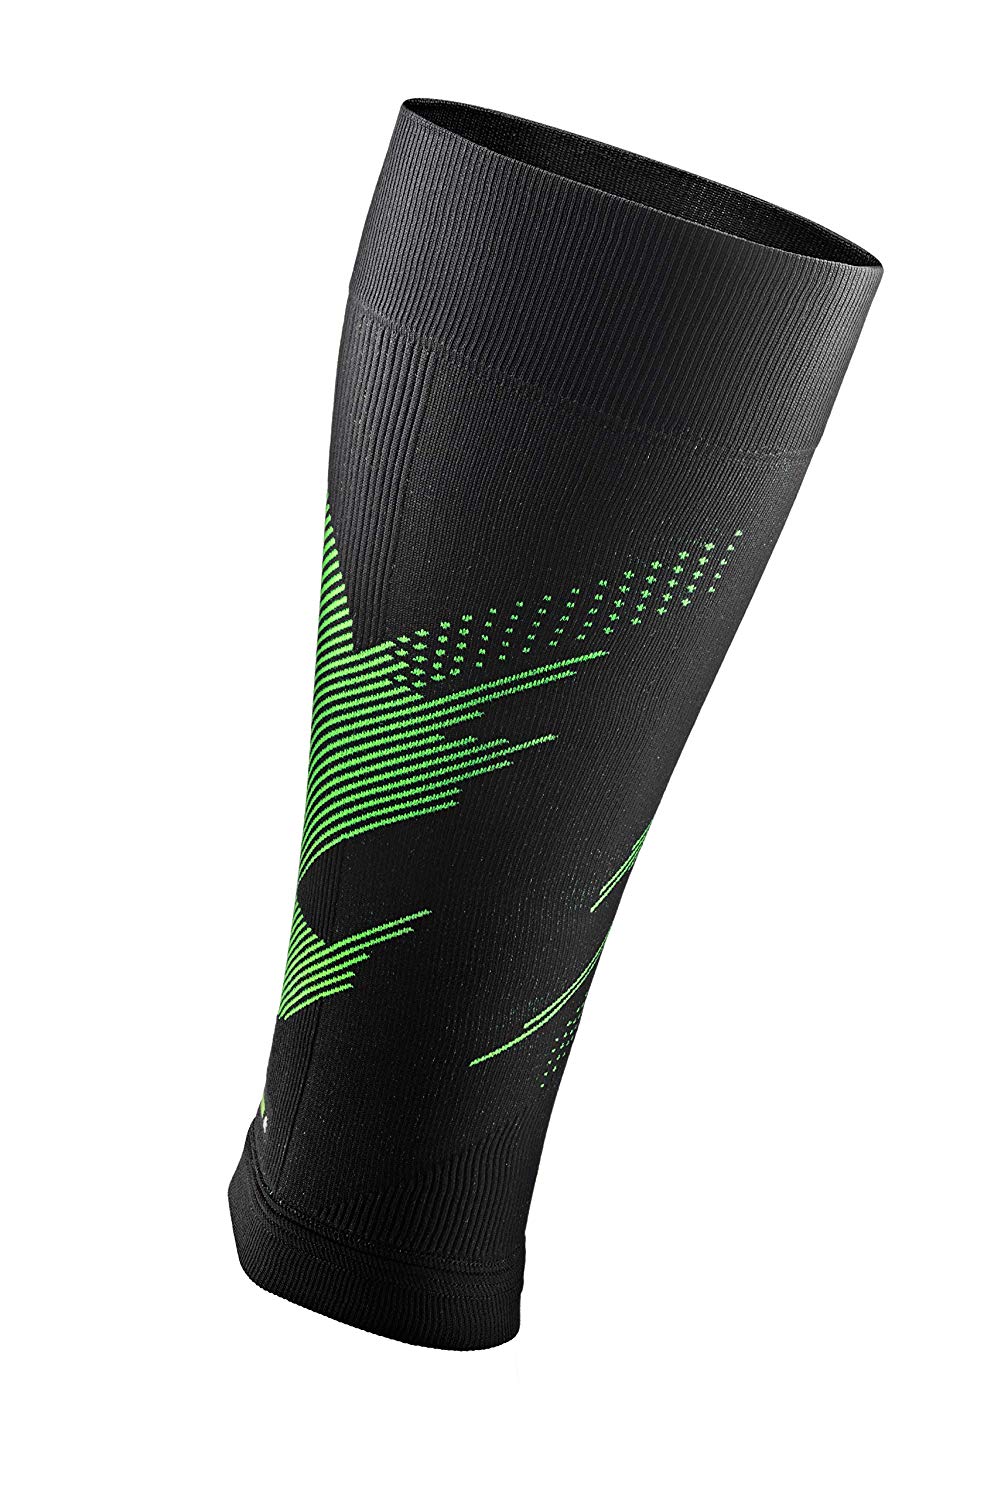 Rockay Blaze Compression Sleeves Fully Reviewed | Thatsweetgift